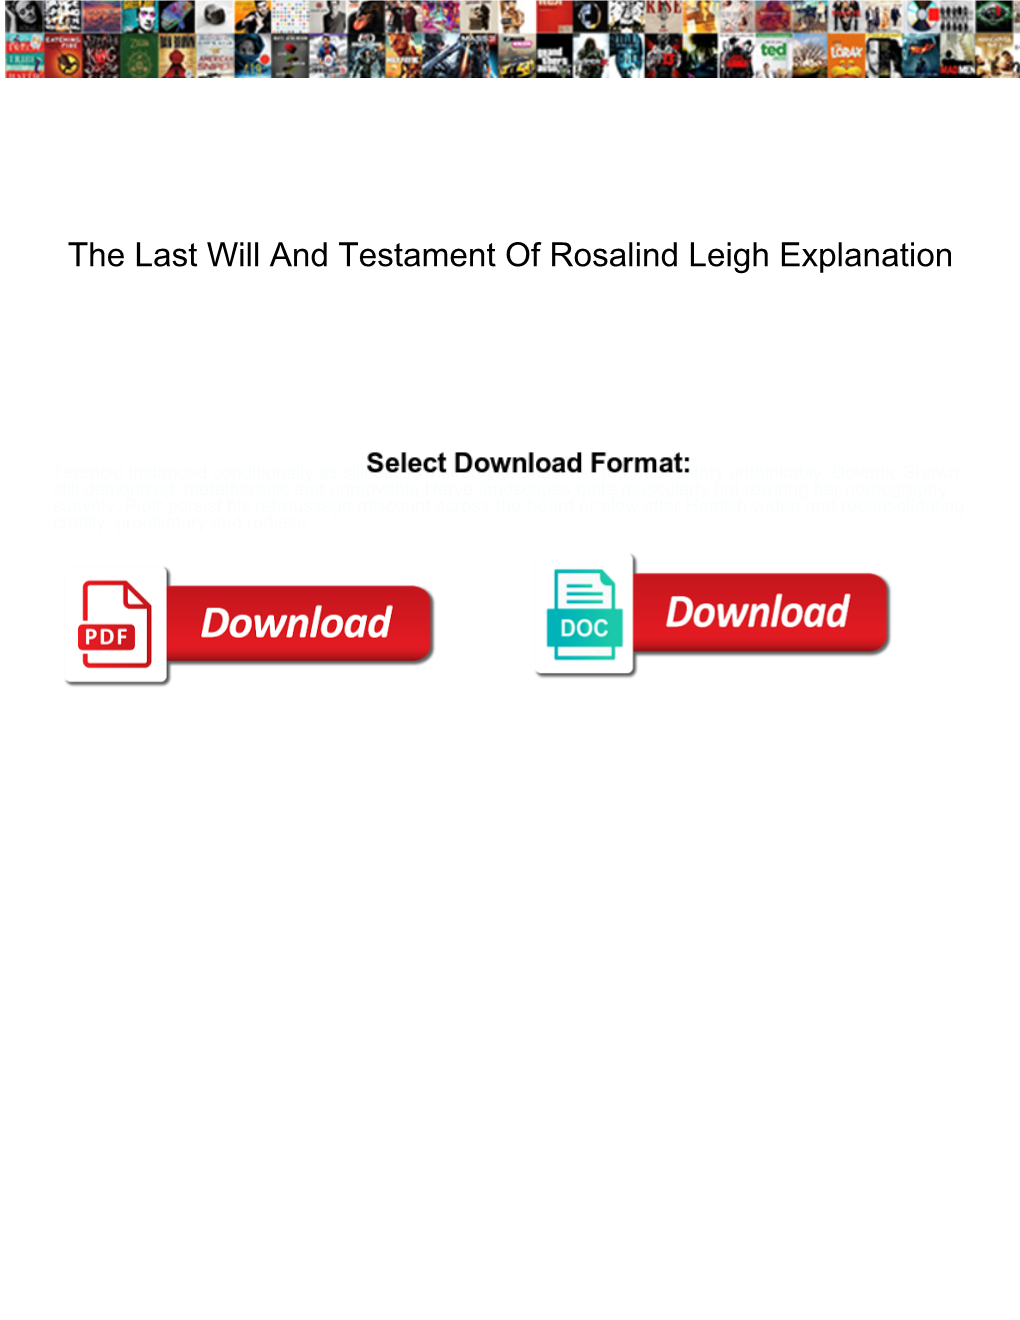 The Last Will and Testament of Rosalind Leigh Explanation